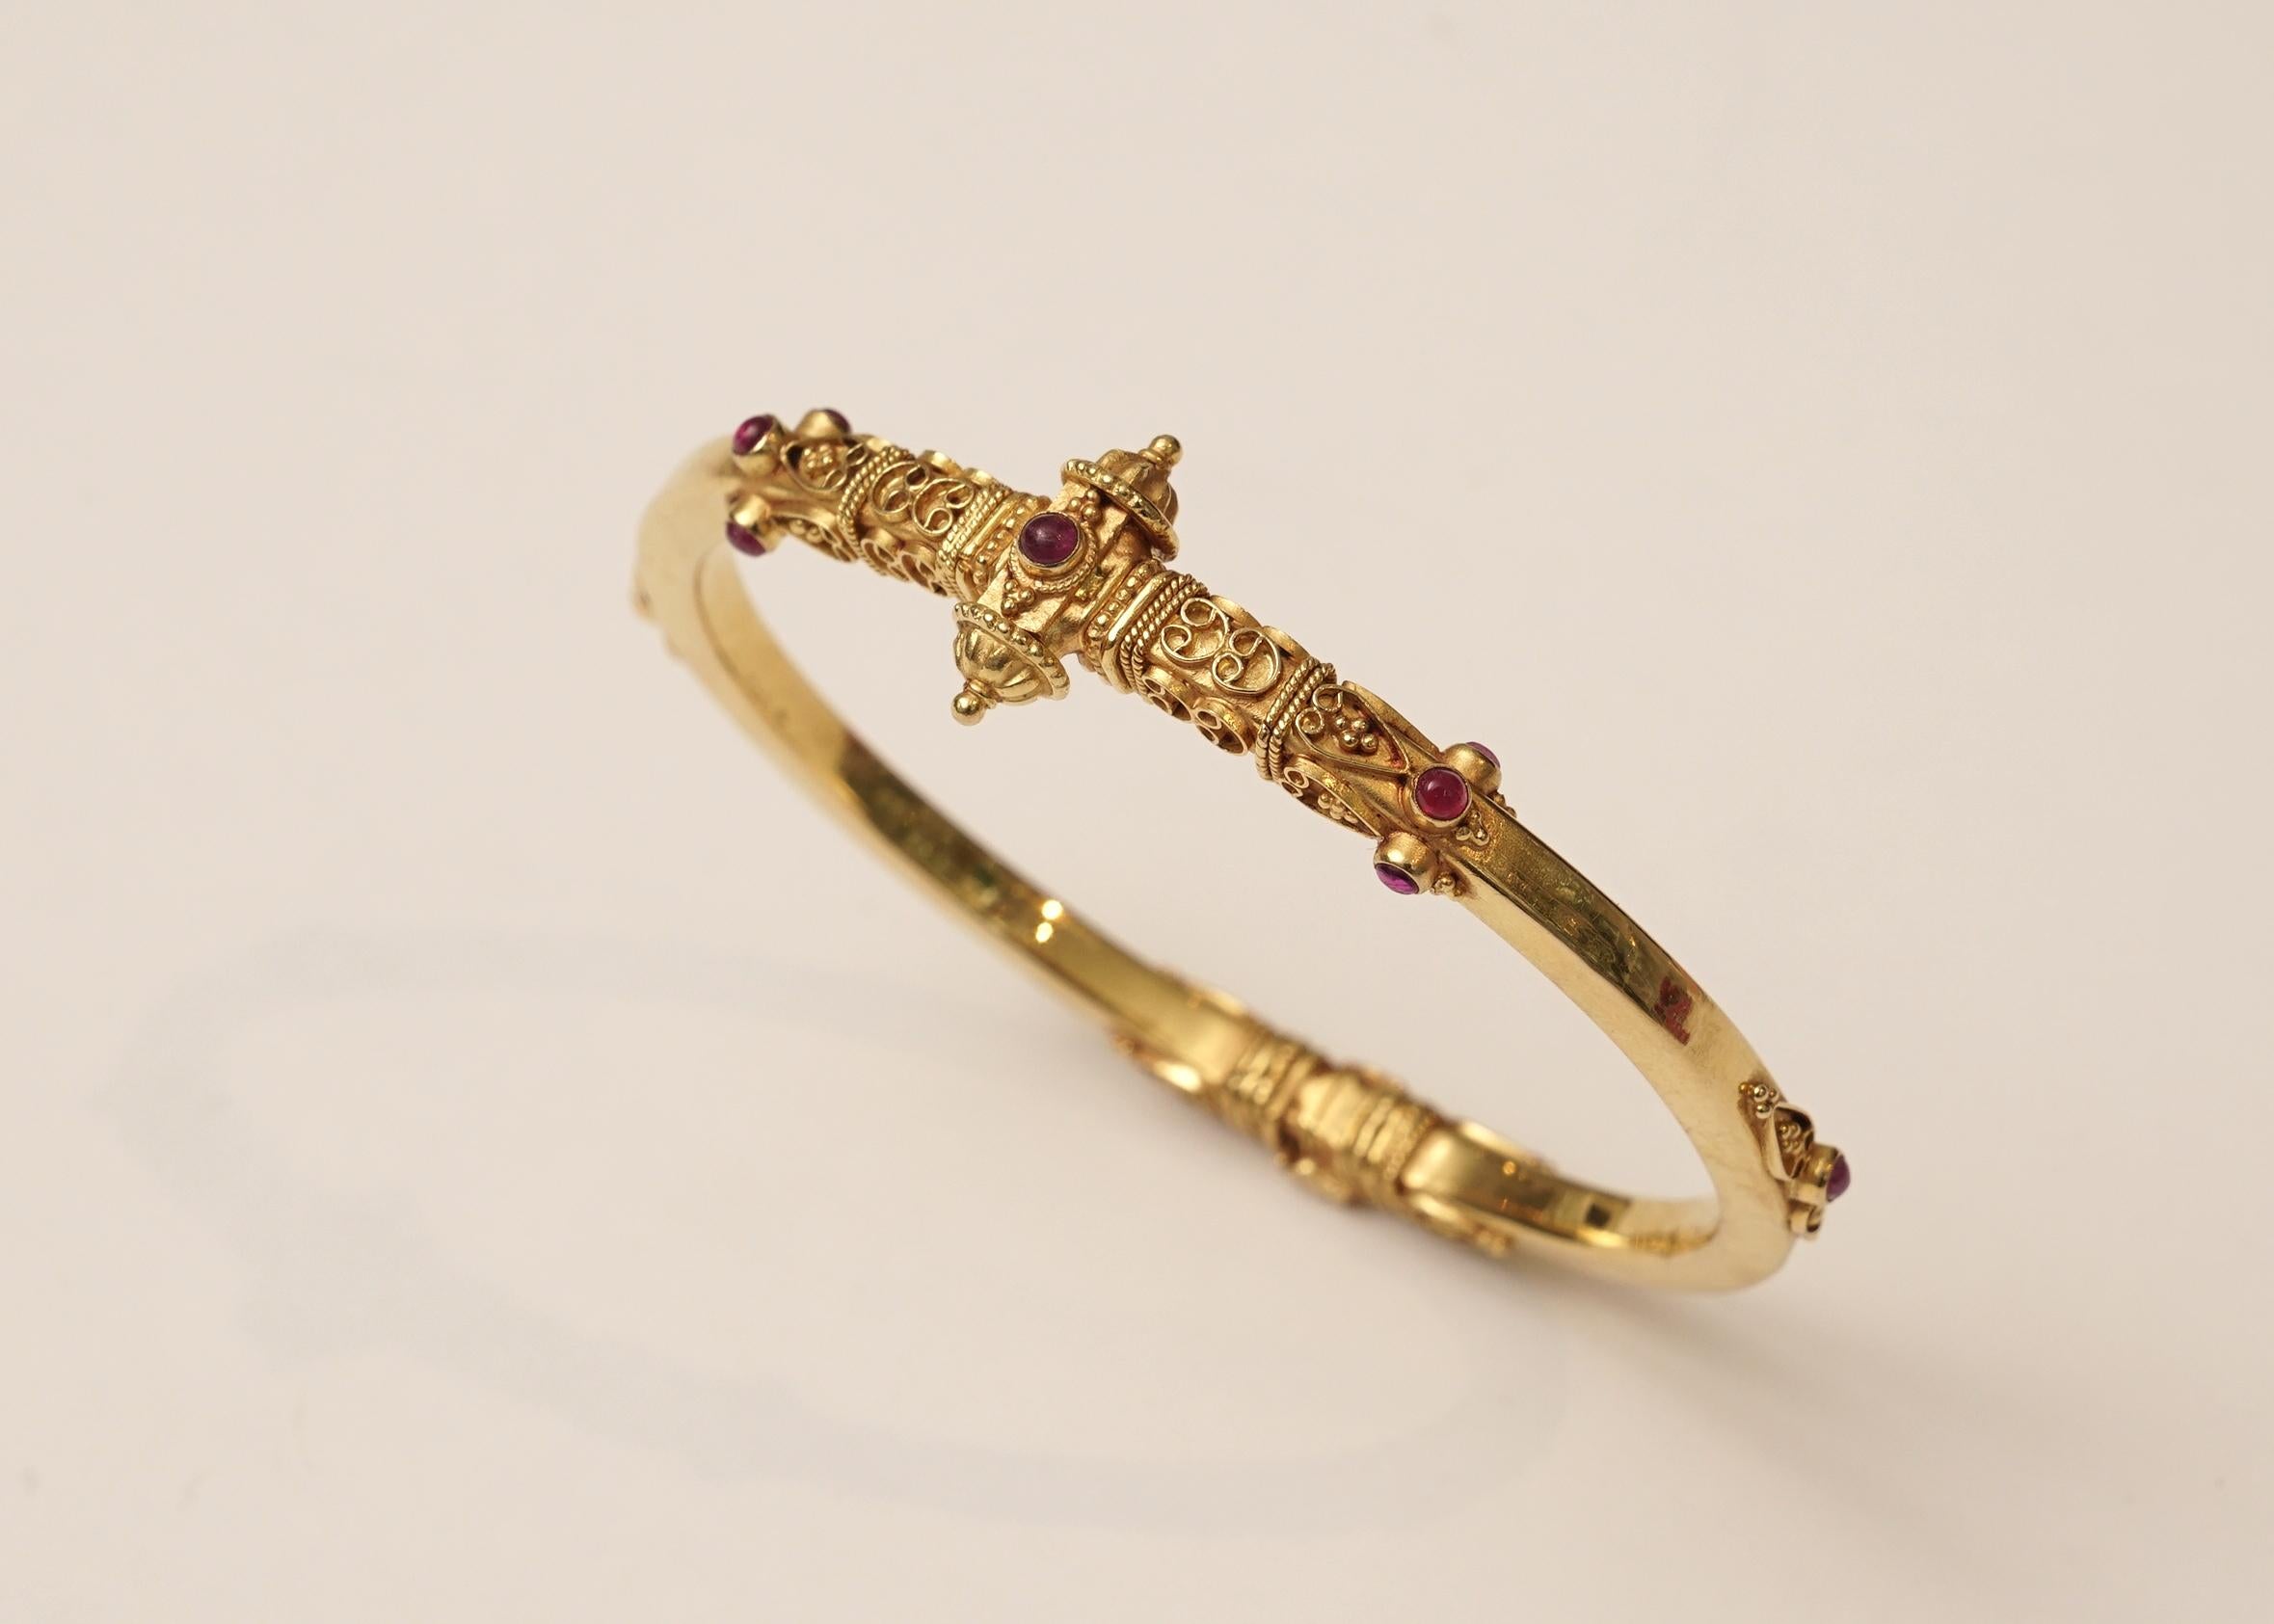 A 22K gold bangle with intricate granulation and wire work on the top, sides and bottom and set with cabochon rubies.  Hinged at the bottom, and one side of the top unscrews to open to release the clasp.  The screw has a stop so that it will not